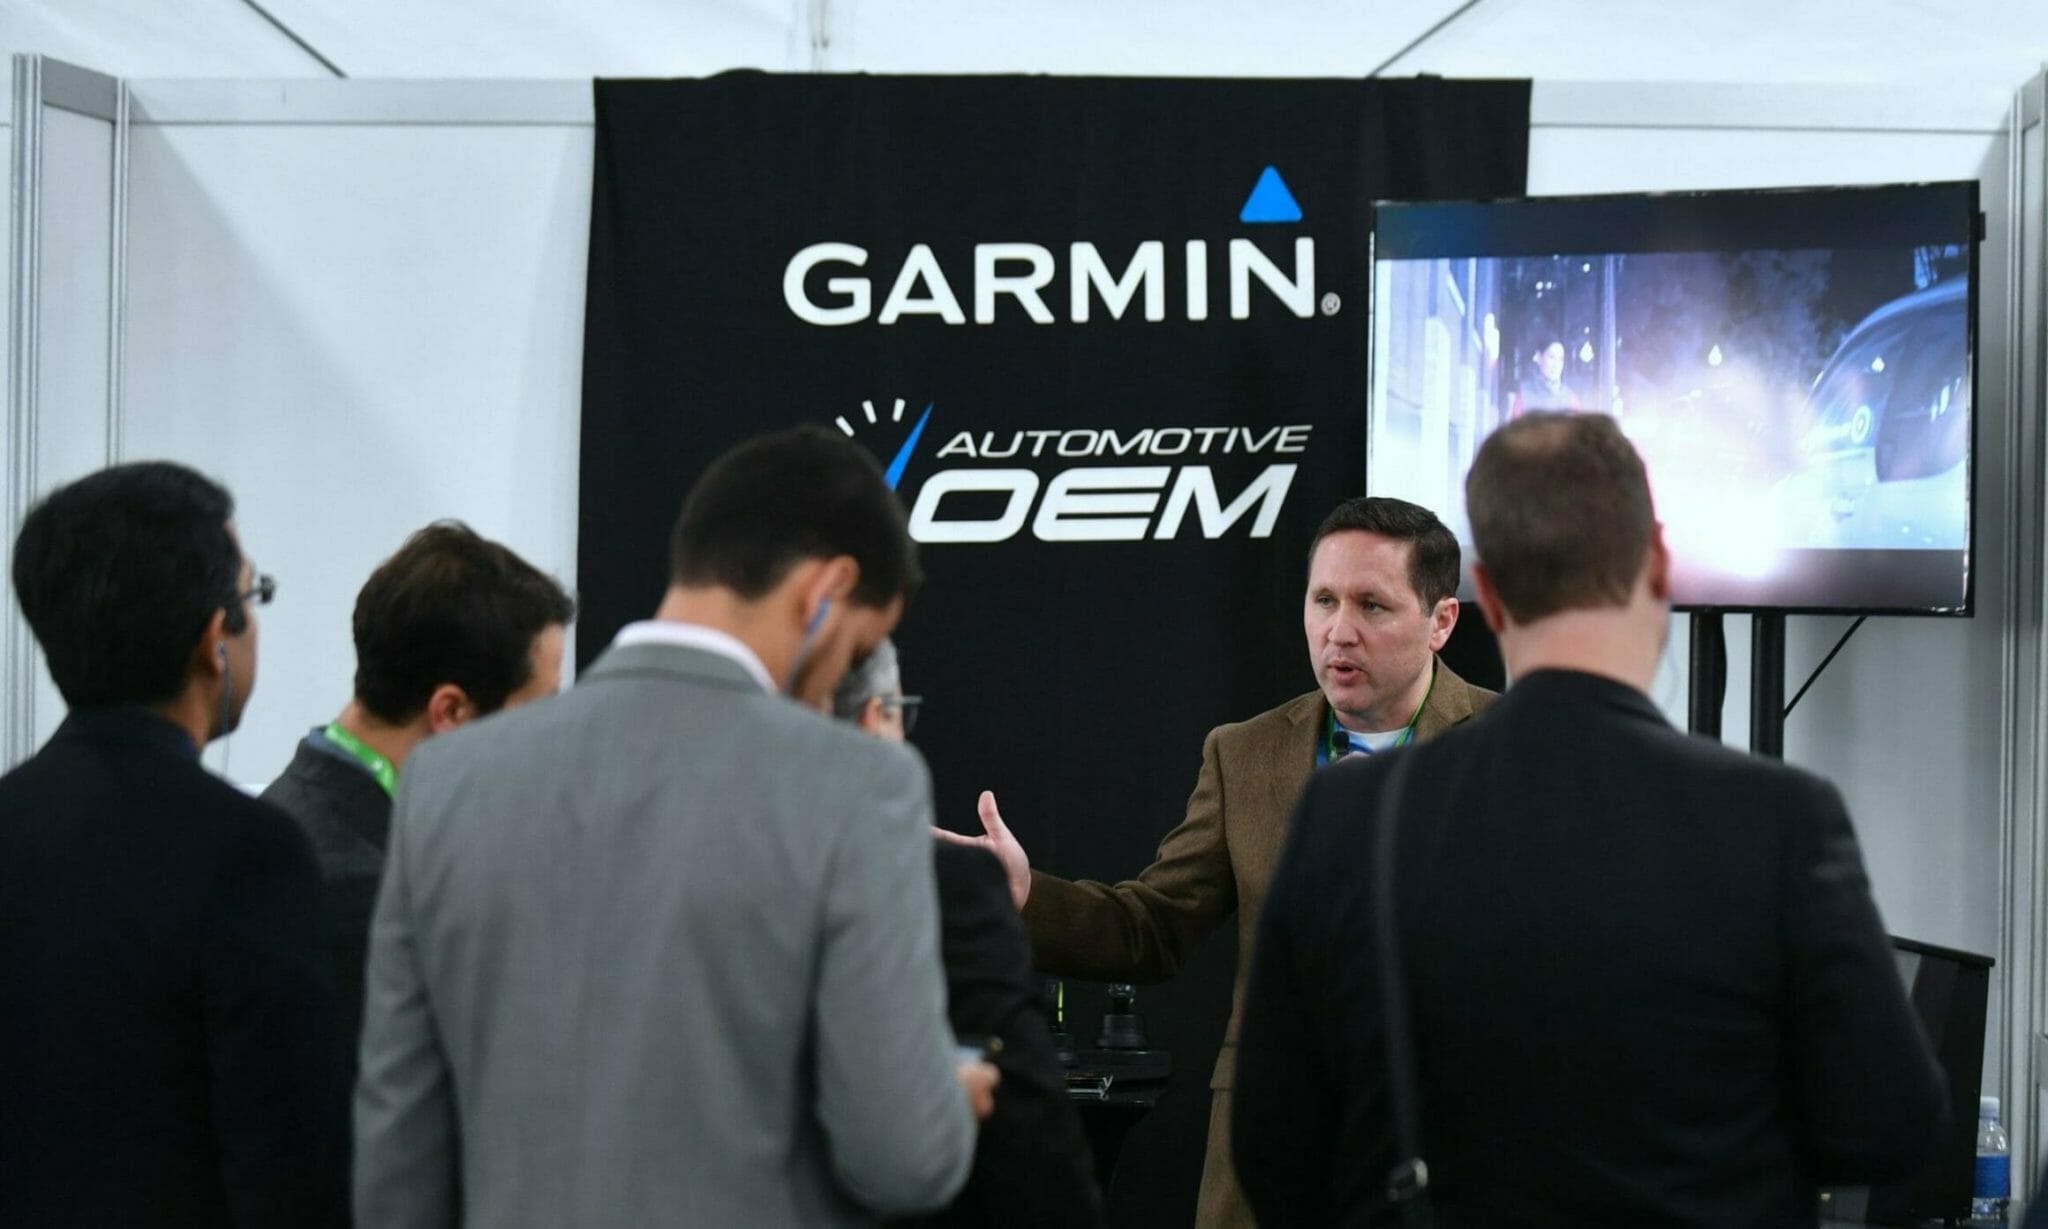 Garmin expects delays after WastedLocker ransomware attack